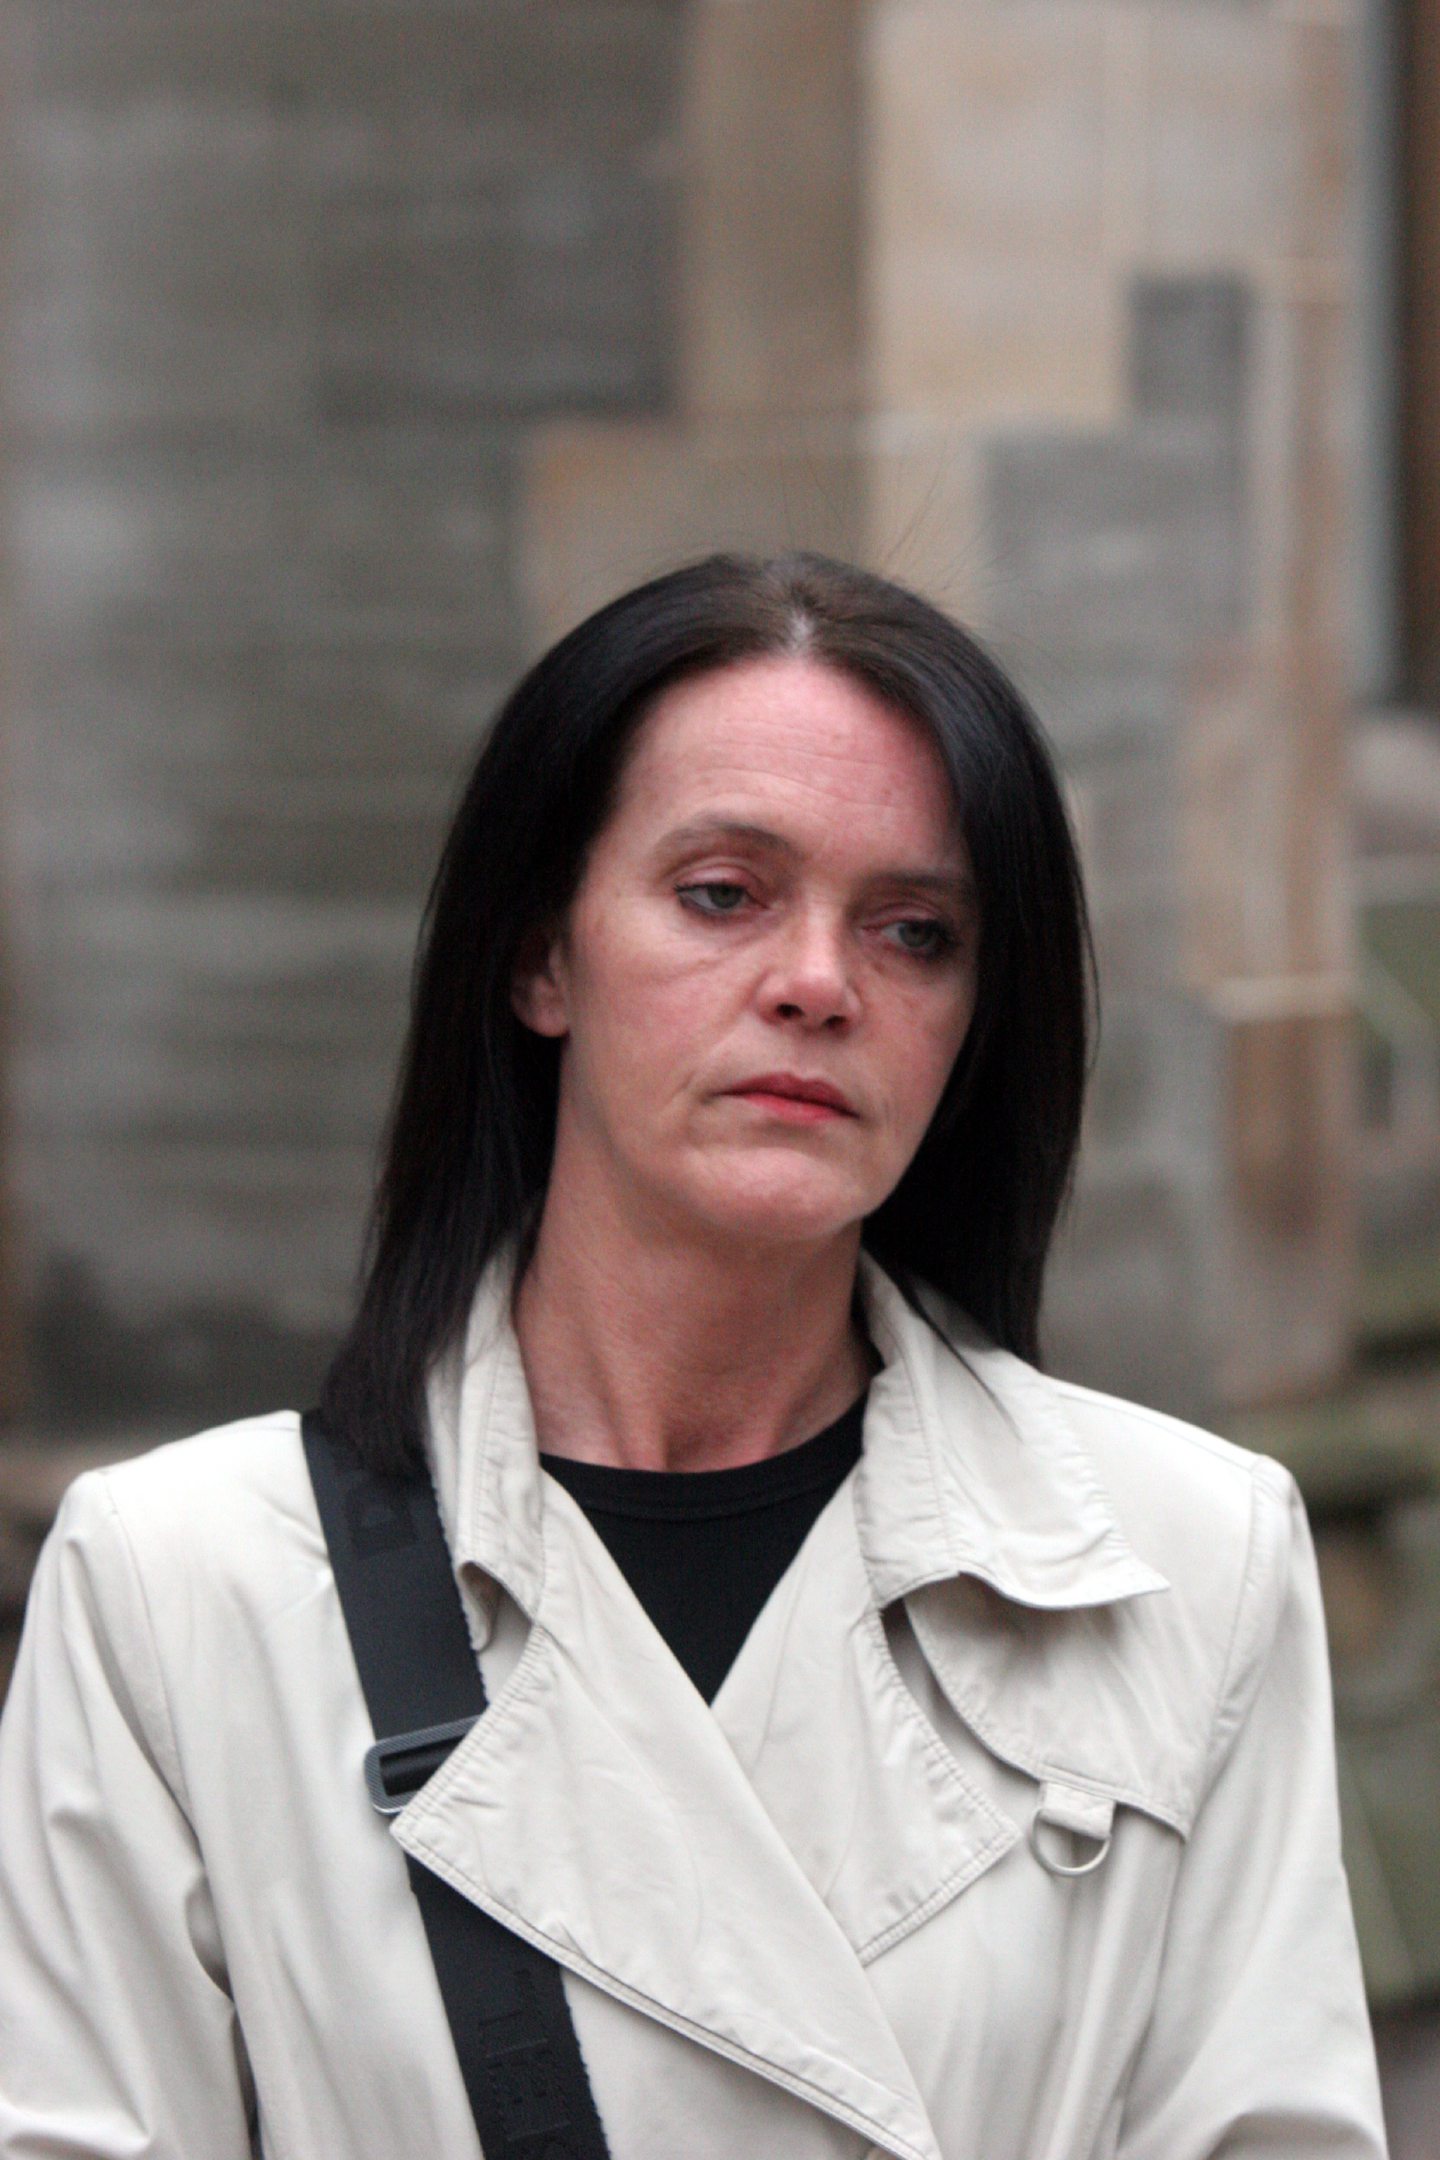 Lucille McLauchlan after being sentenced at Dundee Sheriff Court in 2011. Image: DC Thomson.